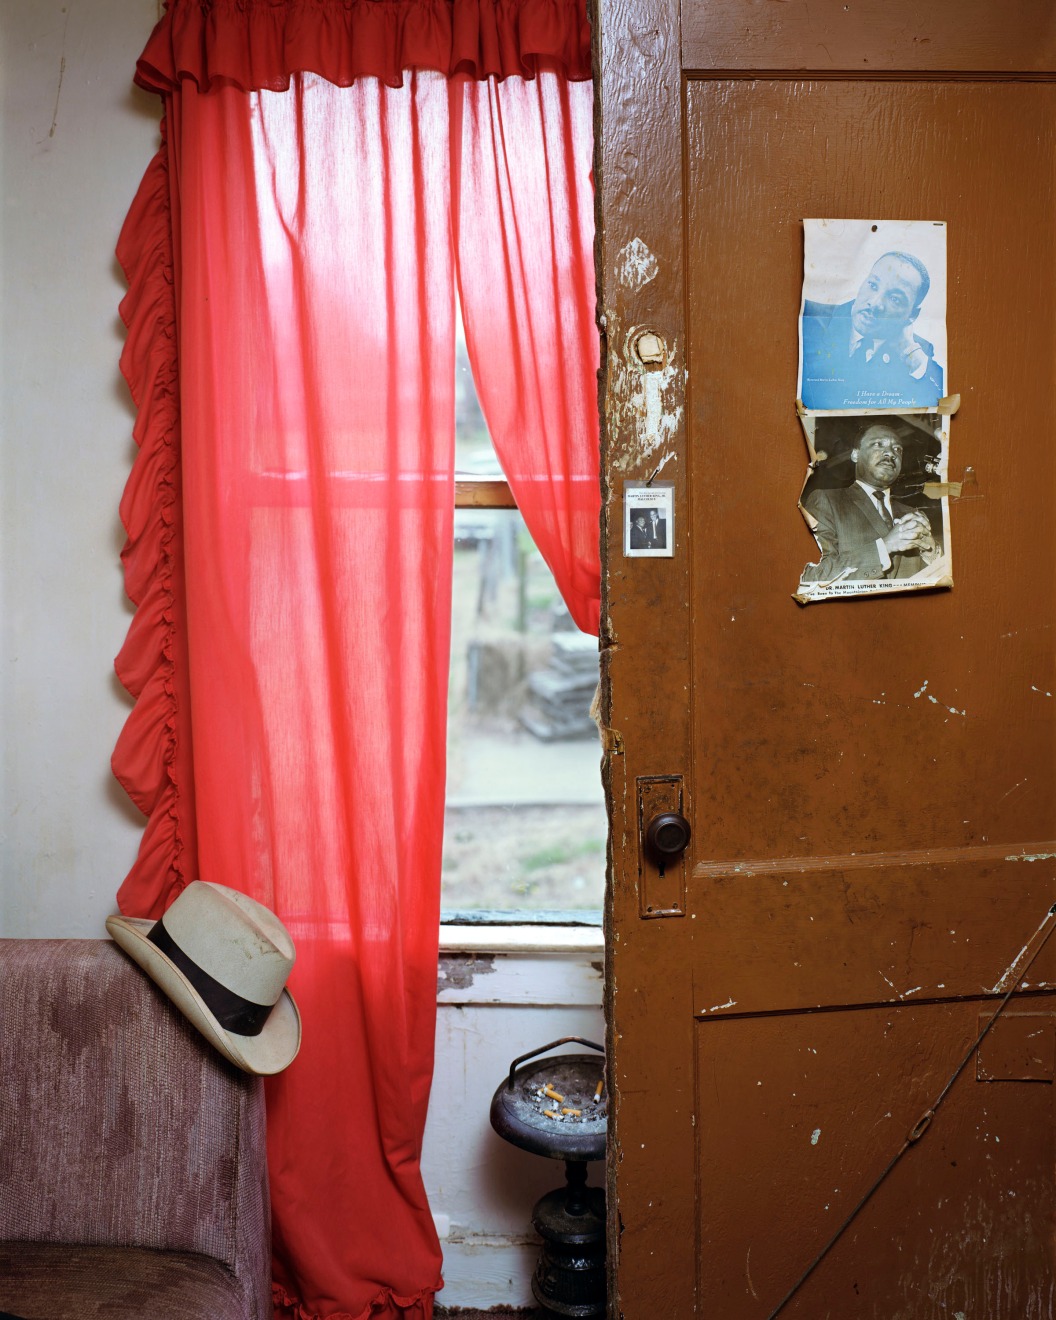 Alec Soth in A Long Arc: Photography and the American South since 1845